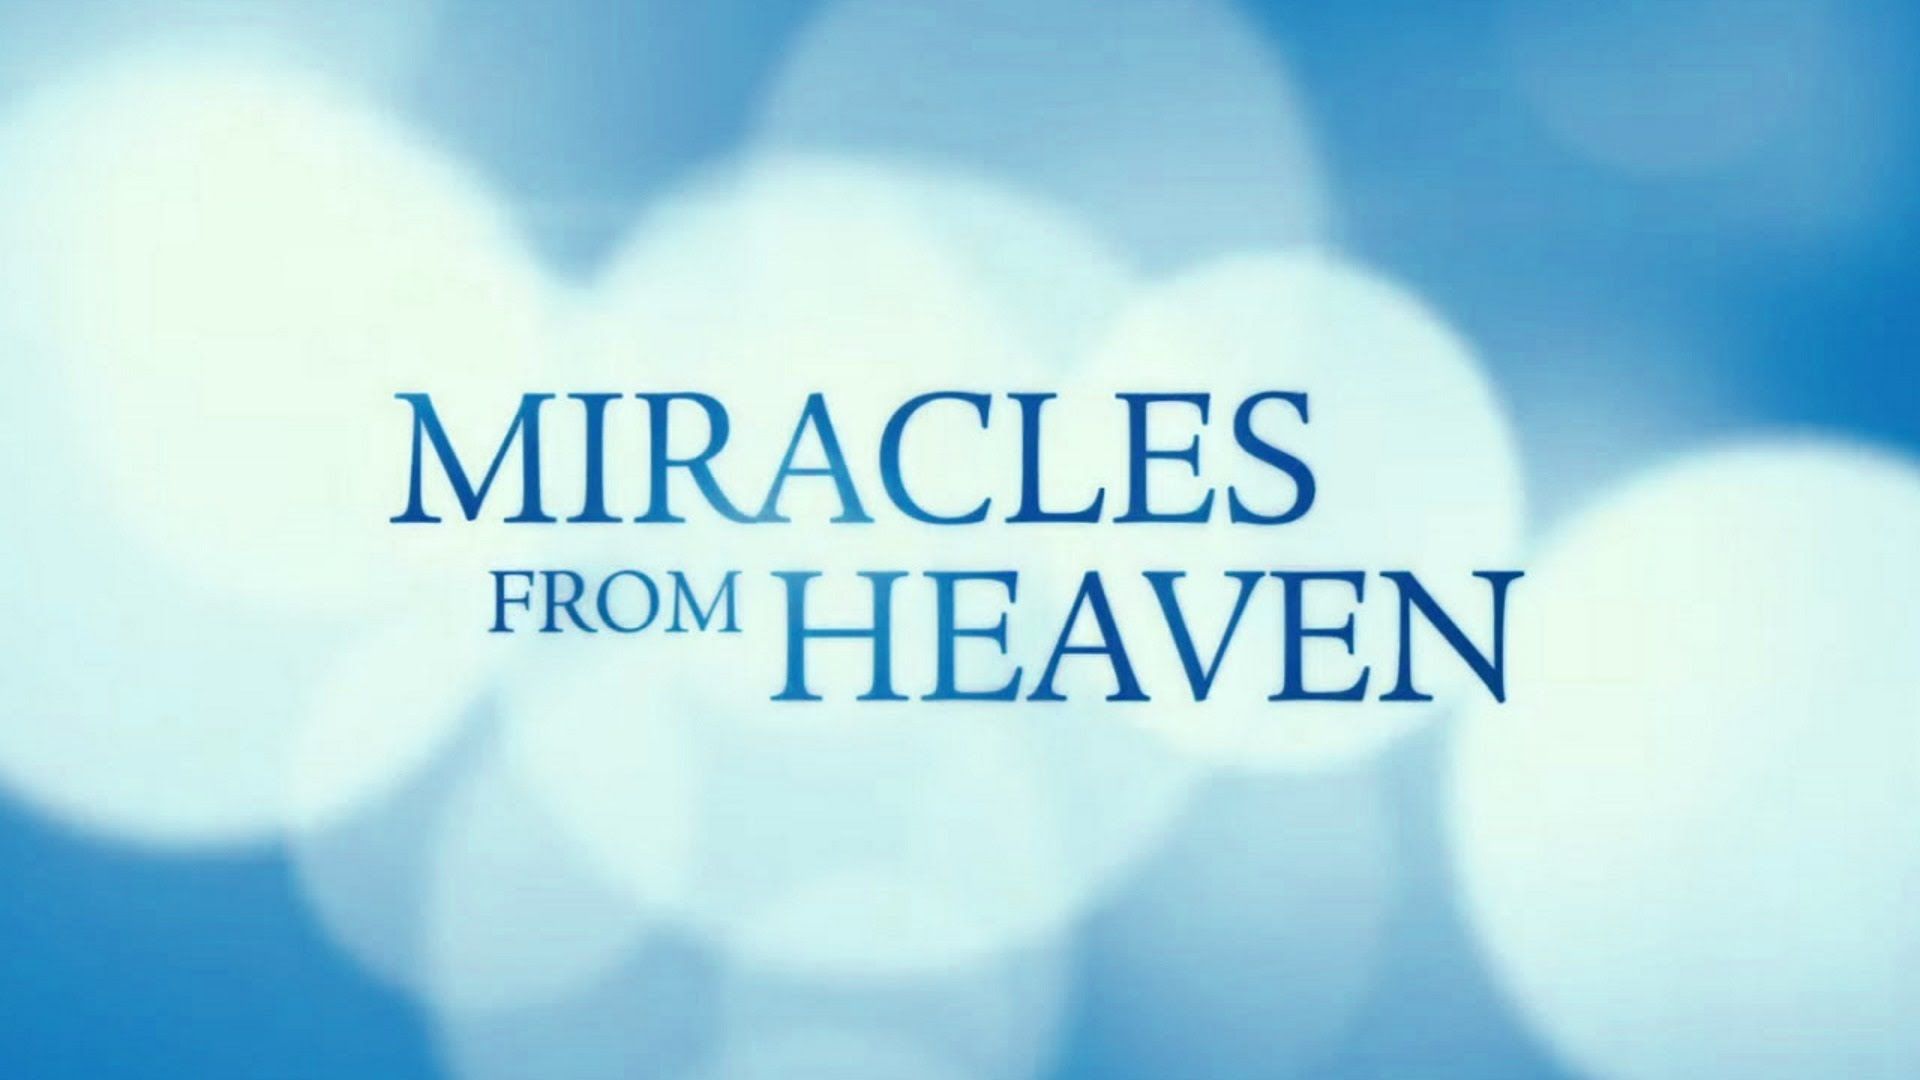 Miracles From Heaven wallpaper, Movie, HQ Miracles From Heaven pictureK Wallpaper 2019